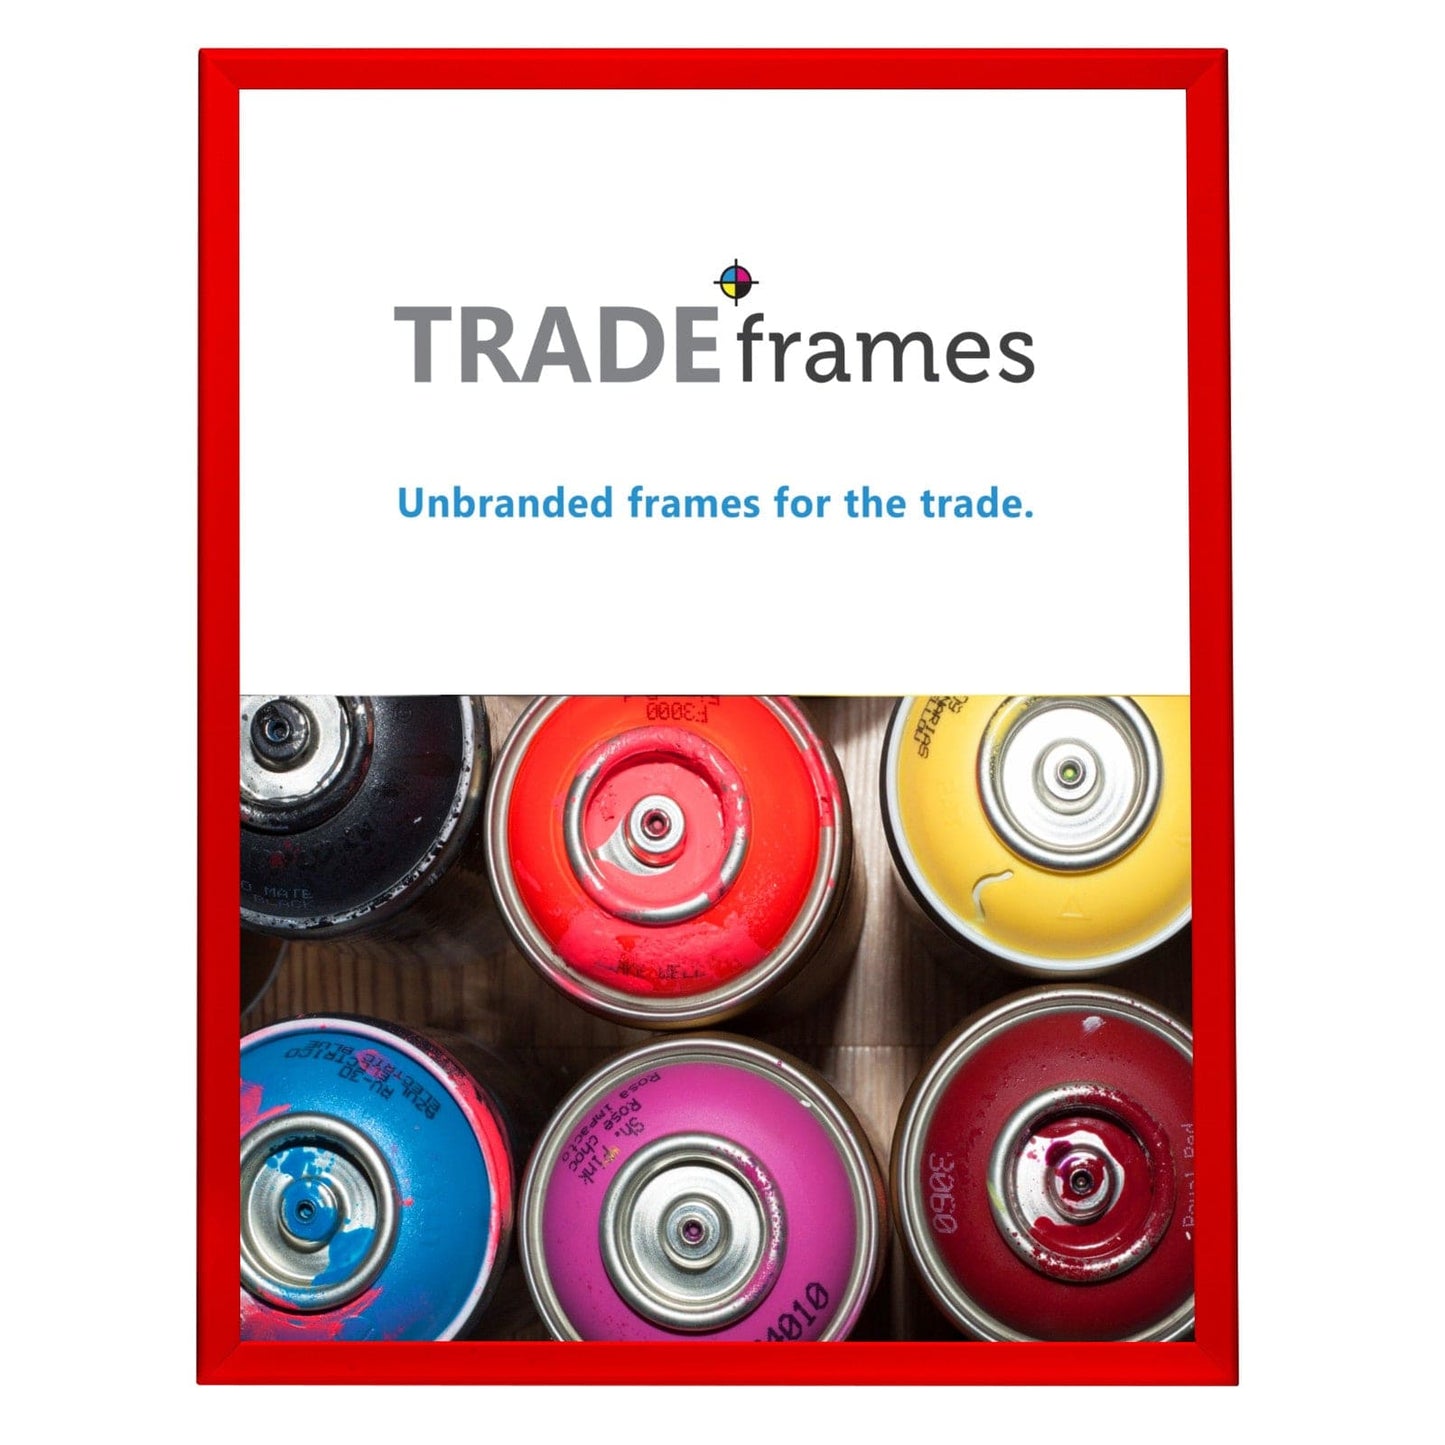 24x30  TRADEframe Red Snap Frame 24x30 - 1.25 inch profile - Snap Frames Direct